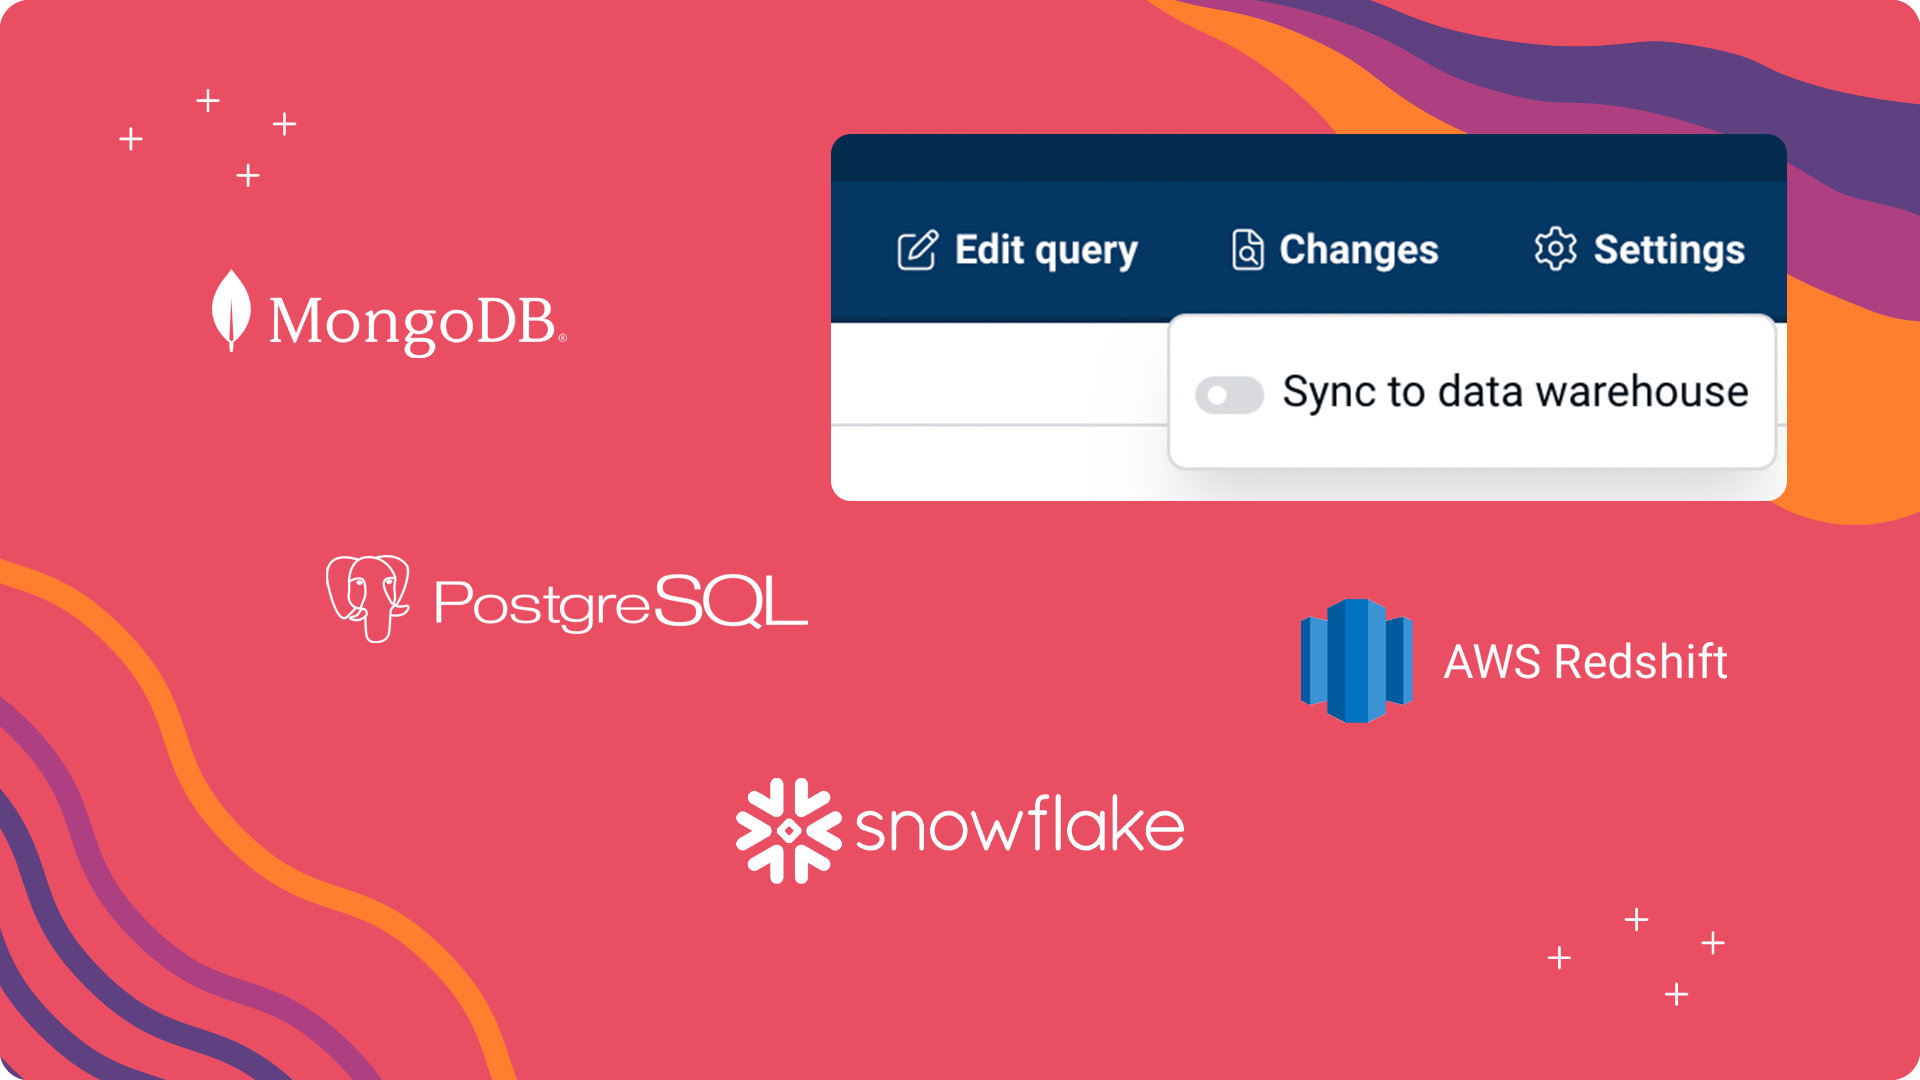 Load your data into your data warehouse such as Snowflake, Redshift, Databricks, Postgres or MongoDB